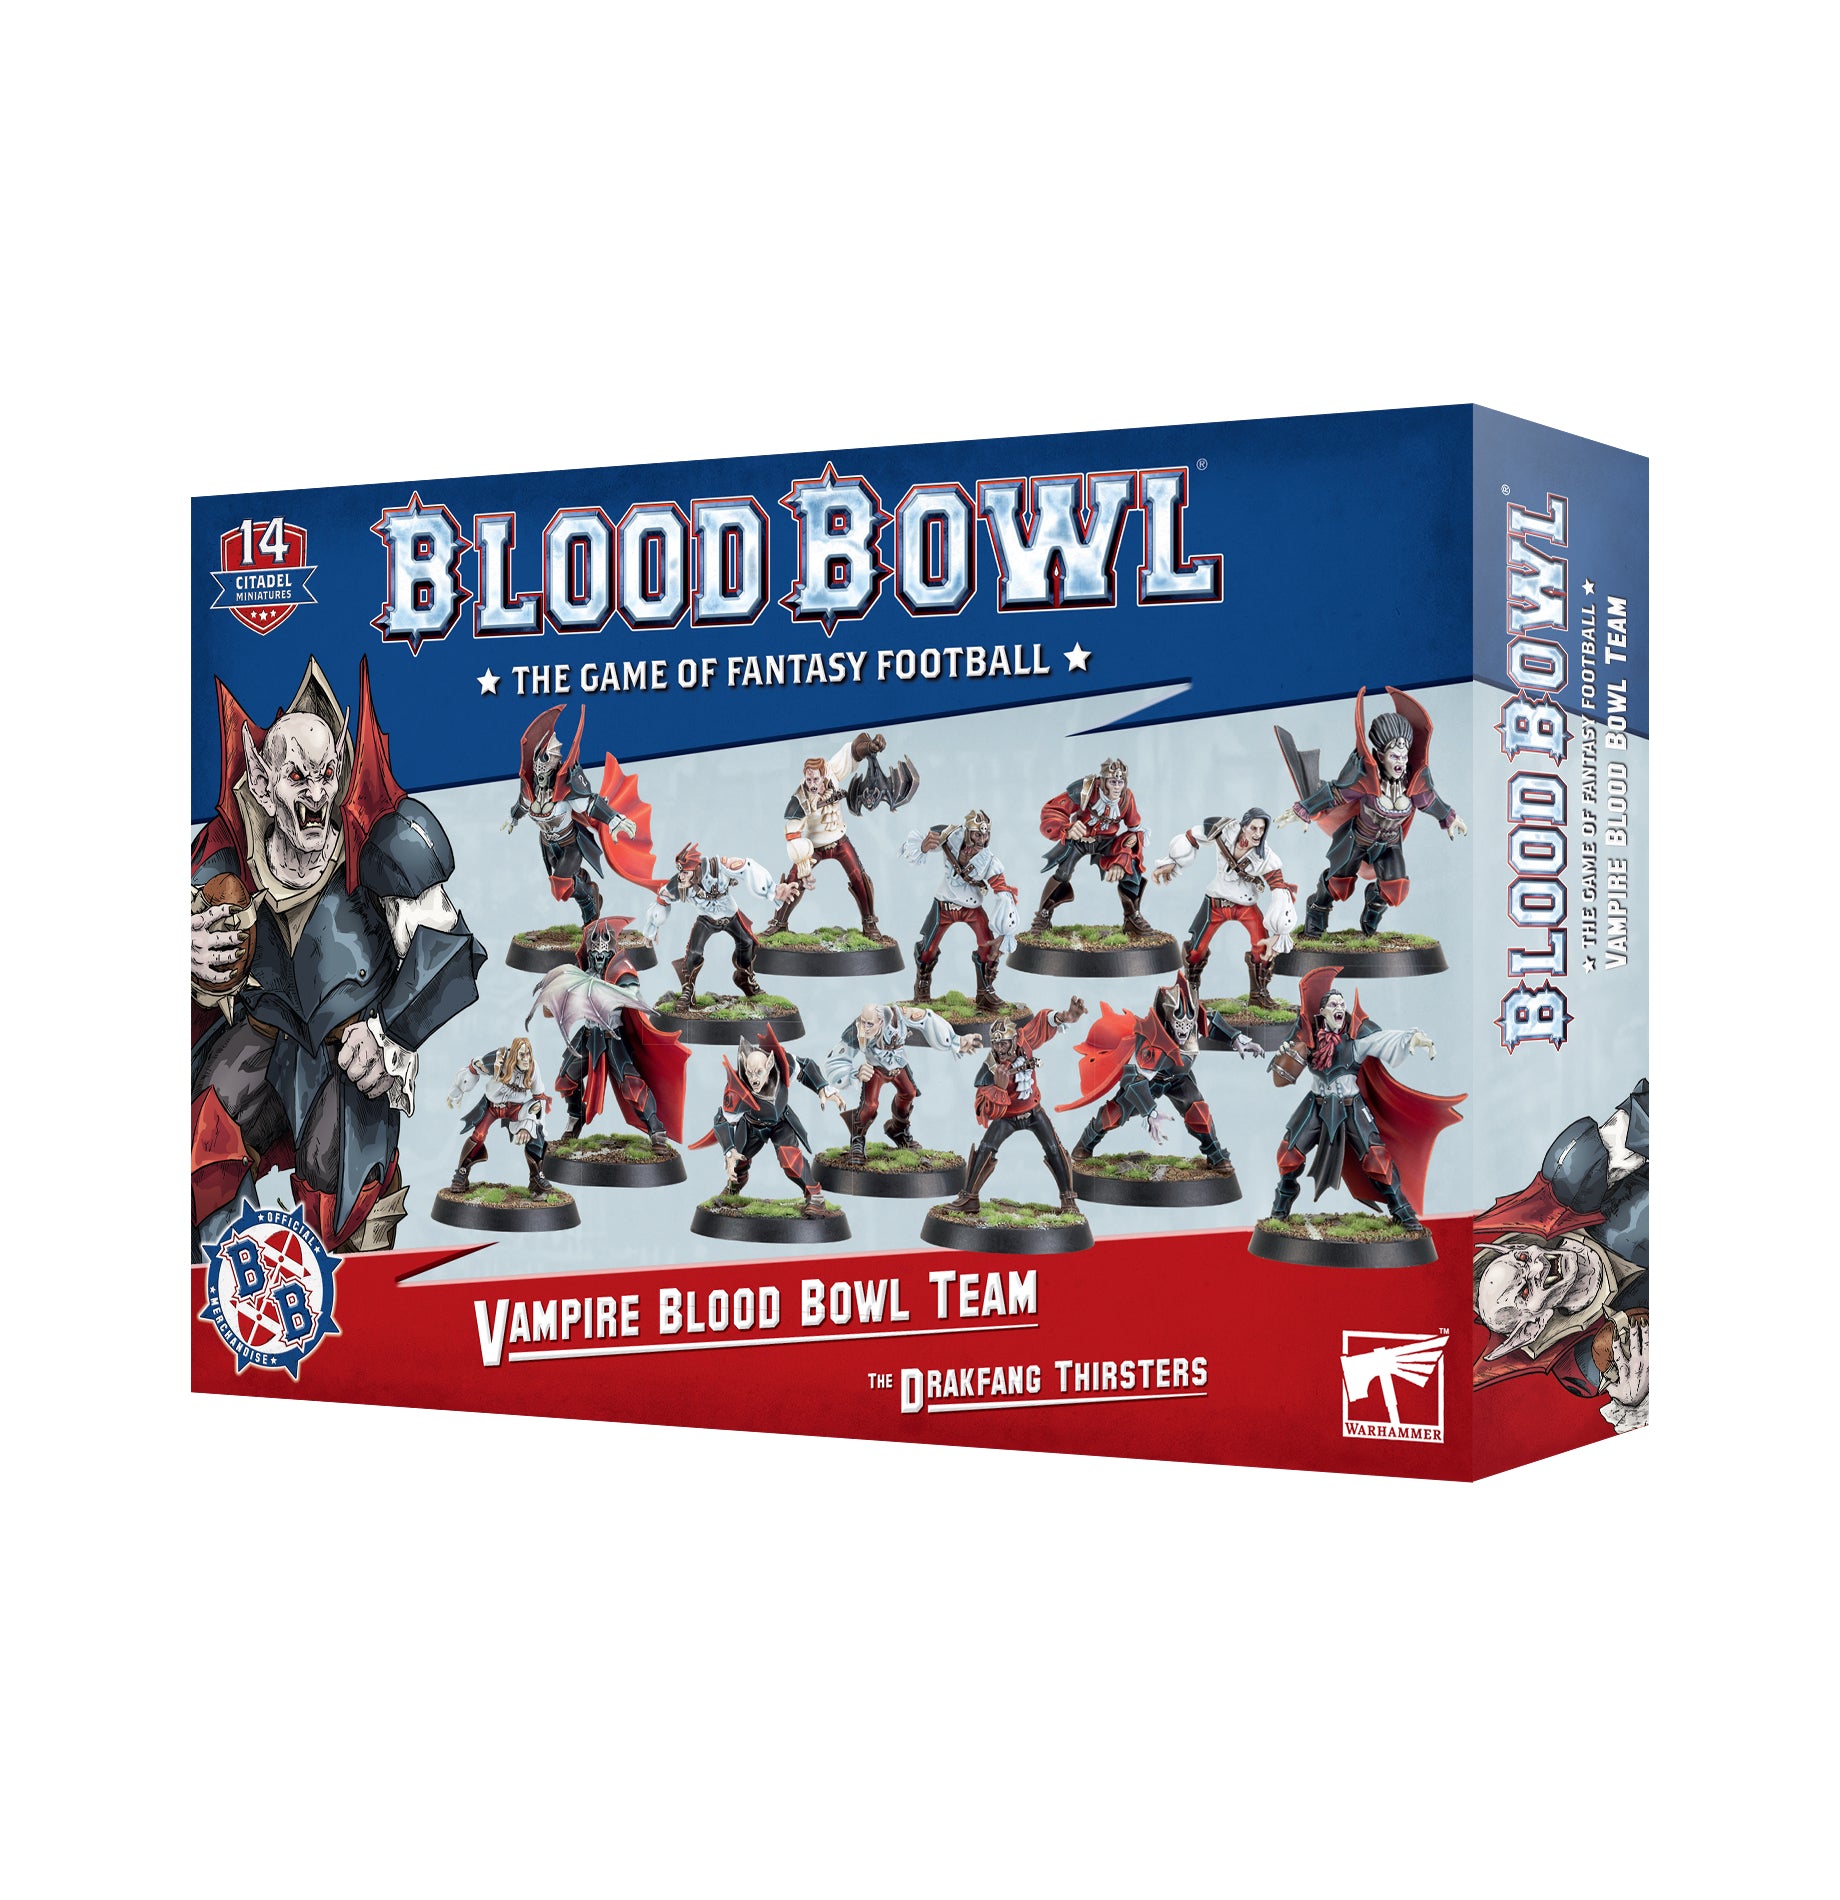 a box of blood bowl figurines on a white background